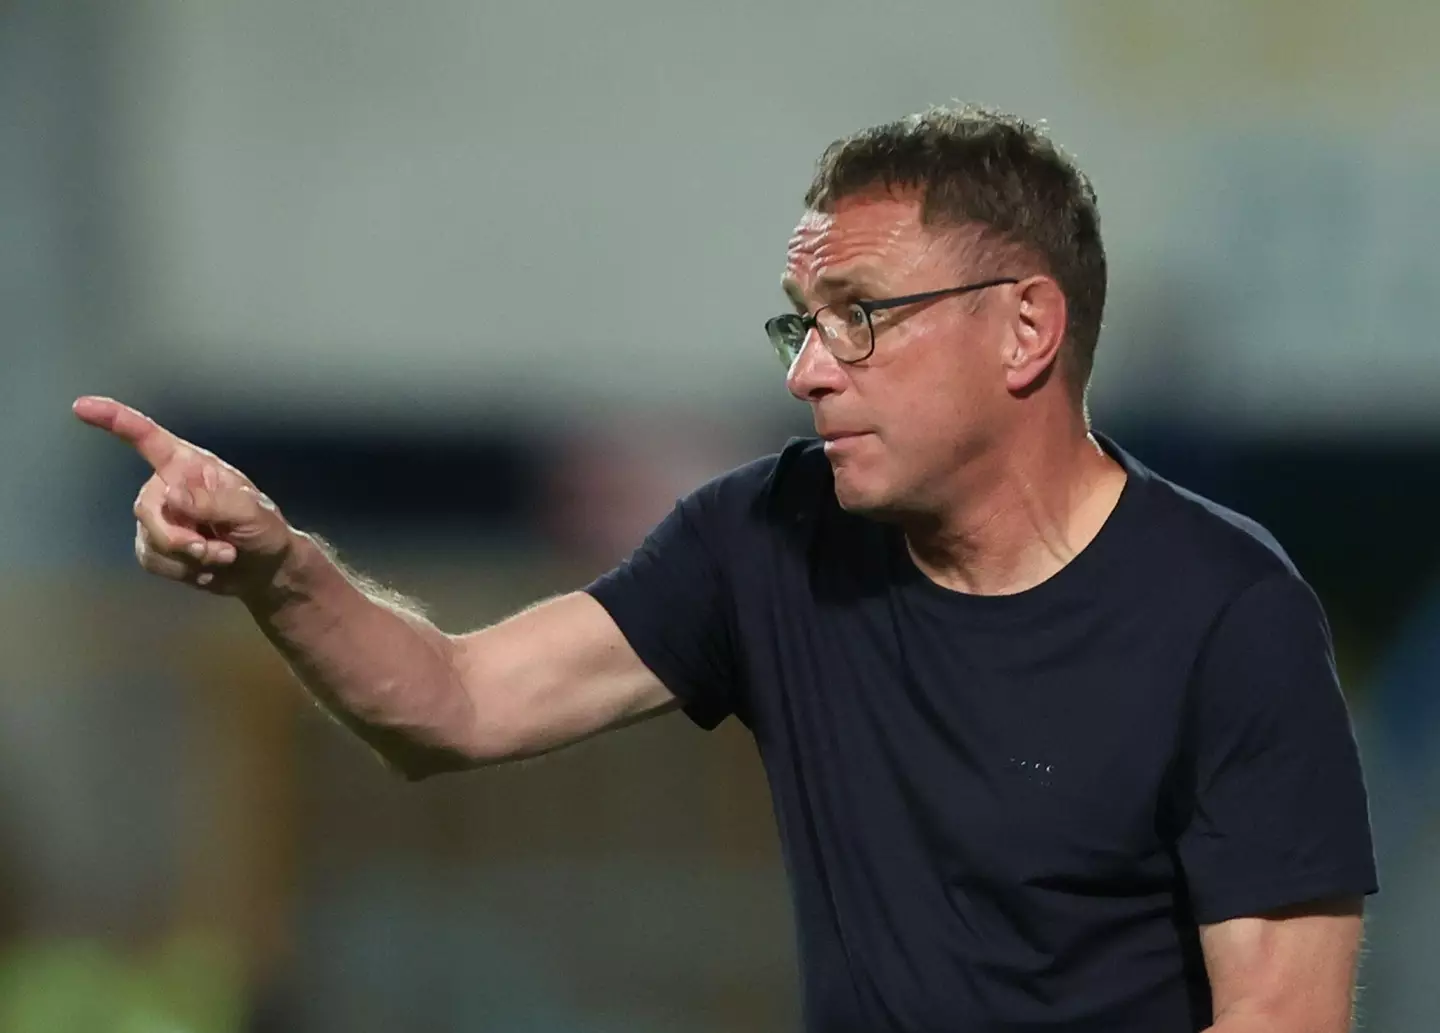 Rangnick during a UEFA Nations League game in June. (Image